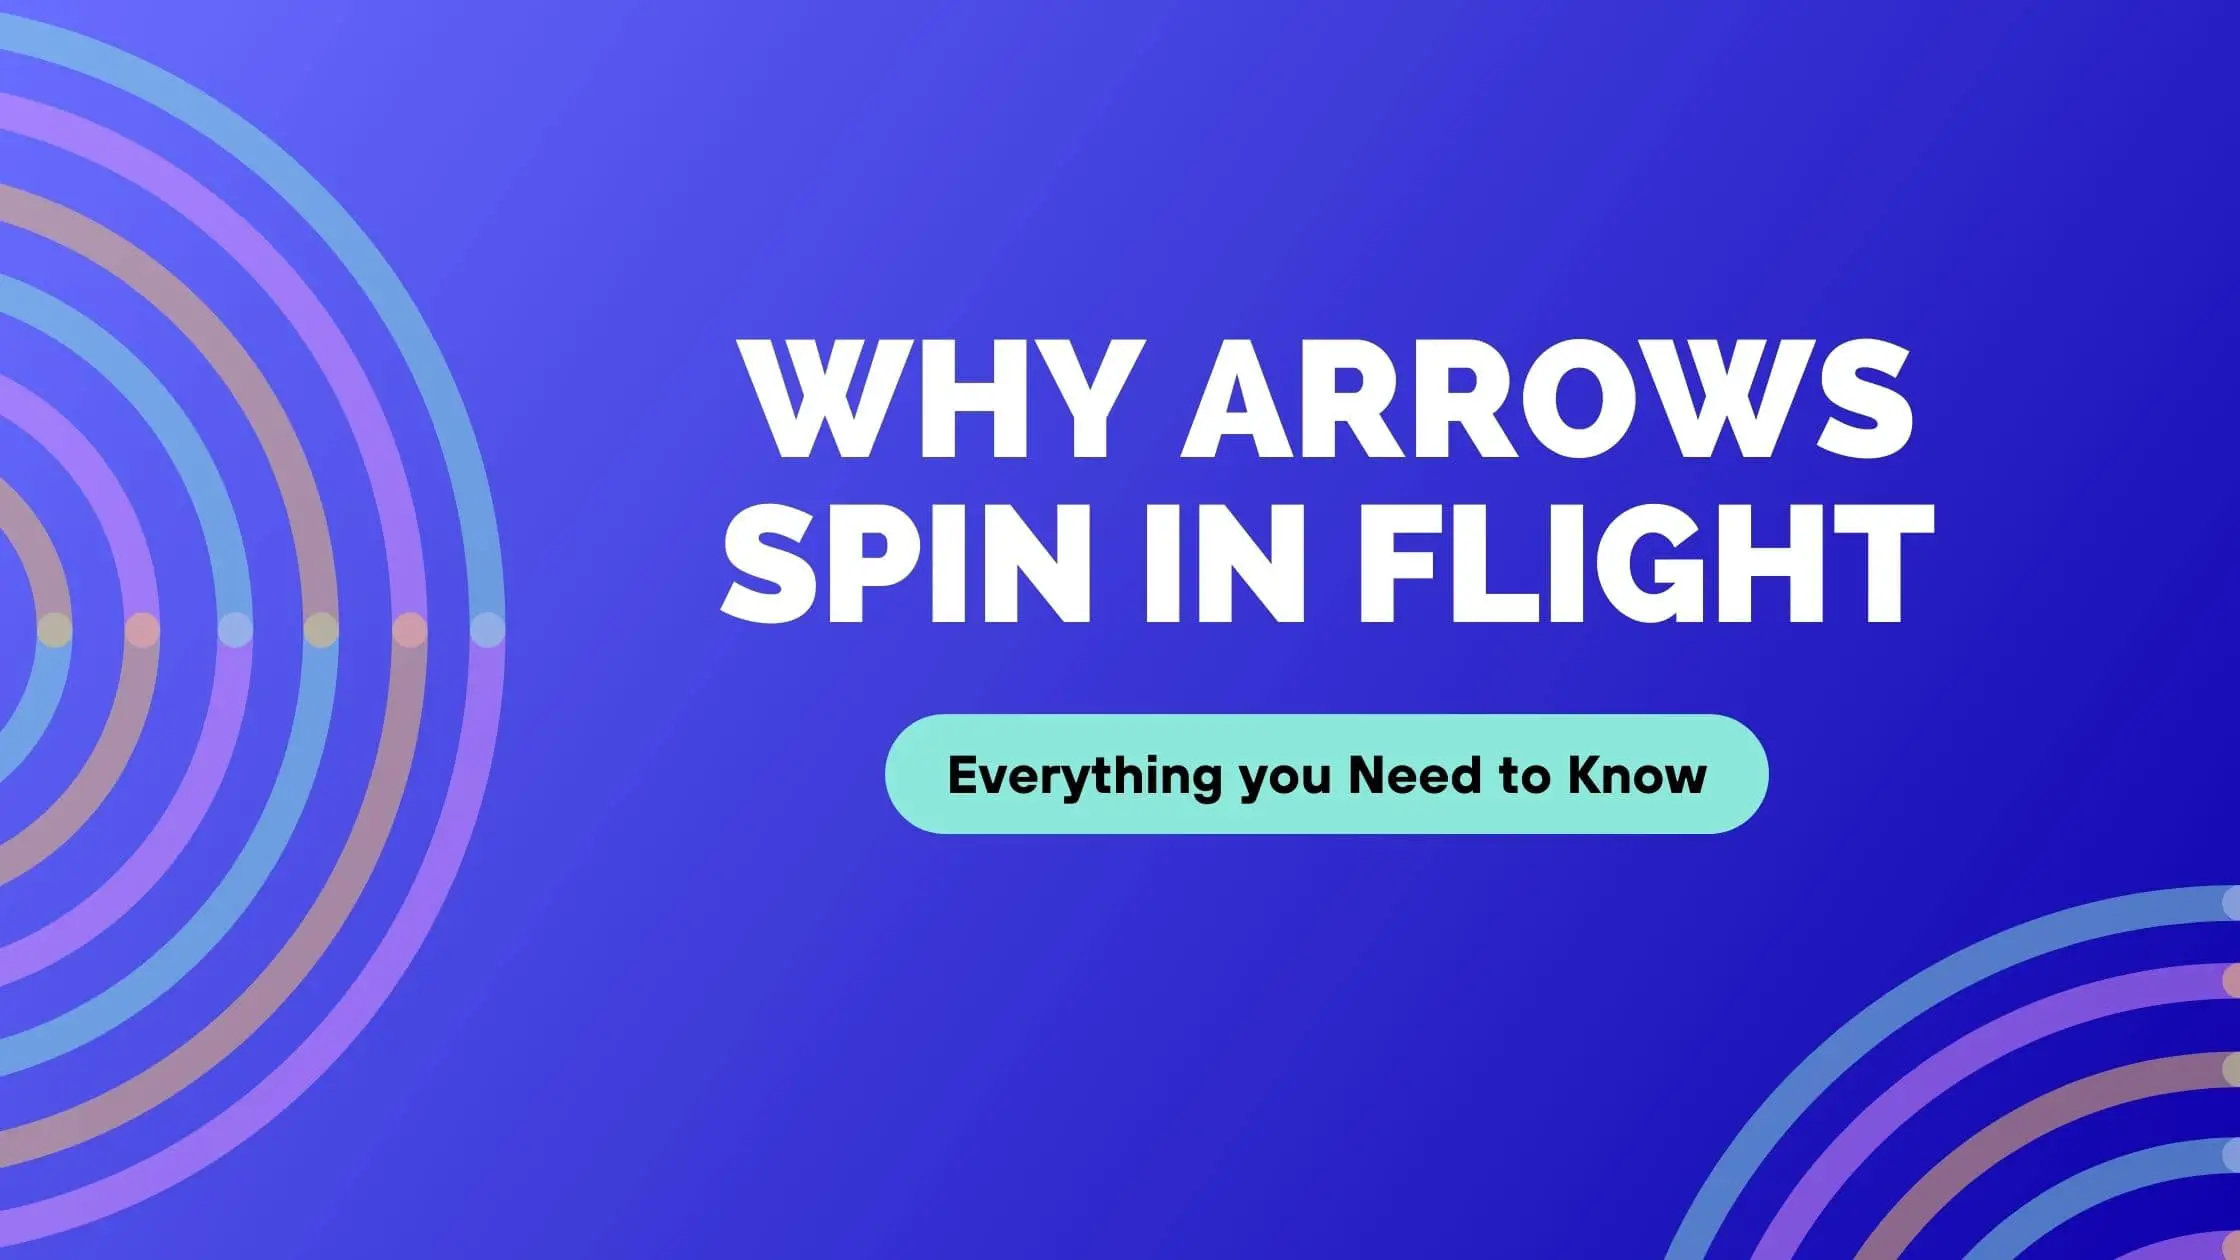 Arrows Spin In Flight (Everything you Need to Know)